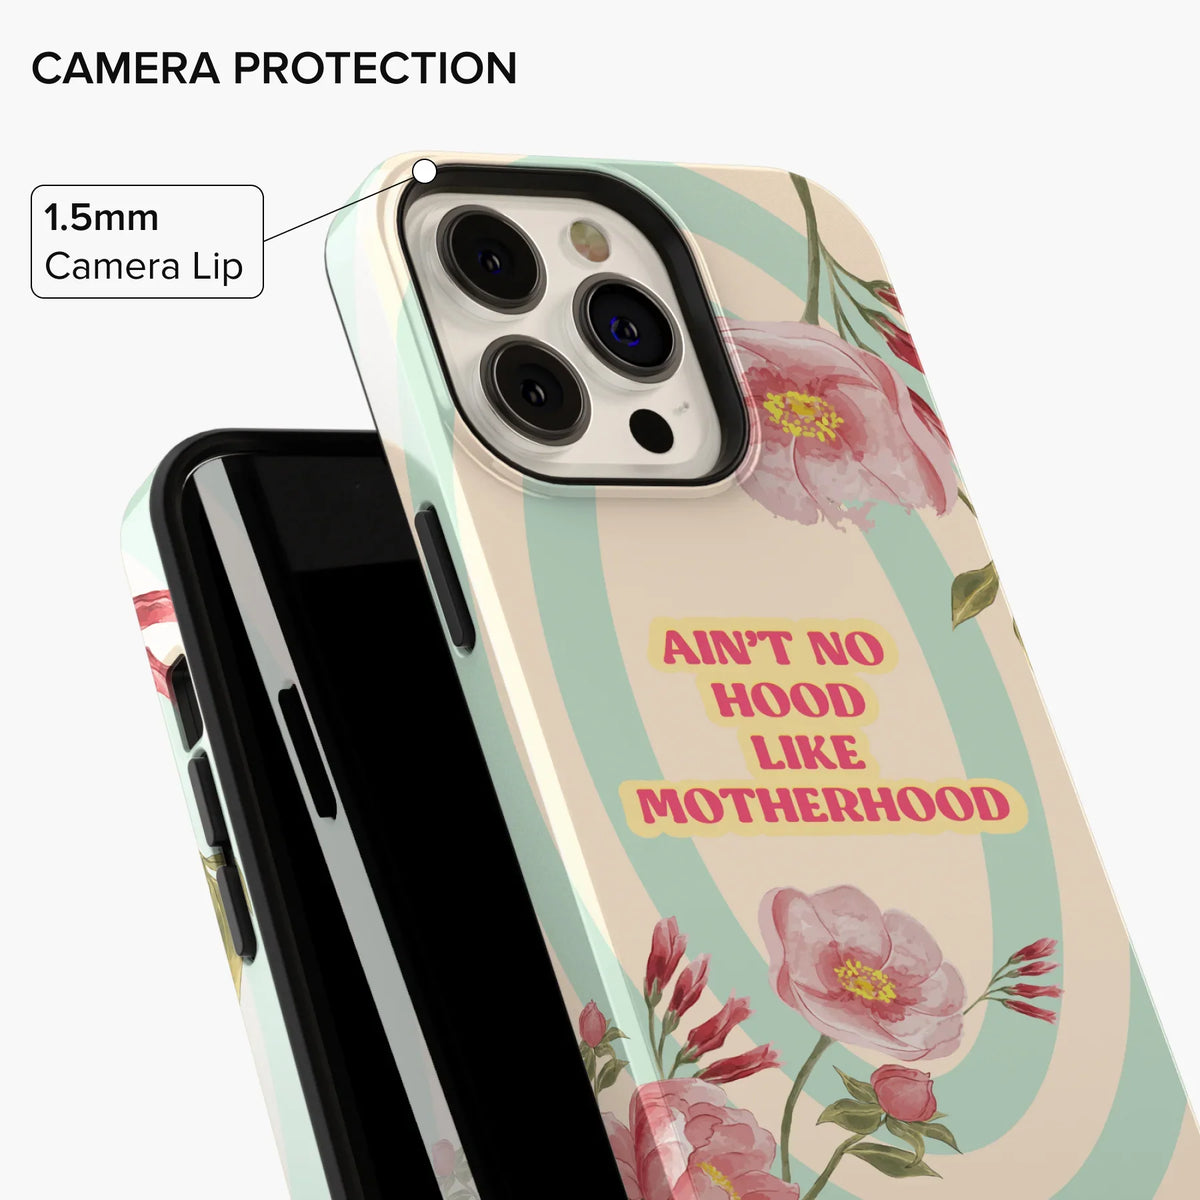 Ain't No Hood iPhone Case - iPhone 11 Pro Max